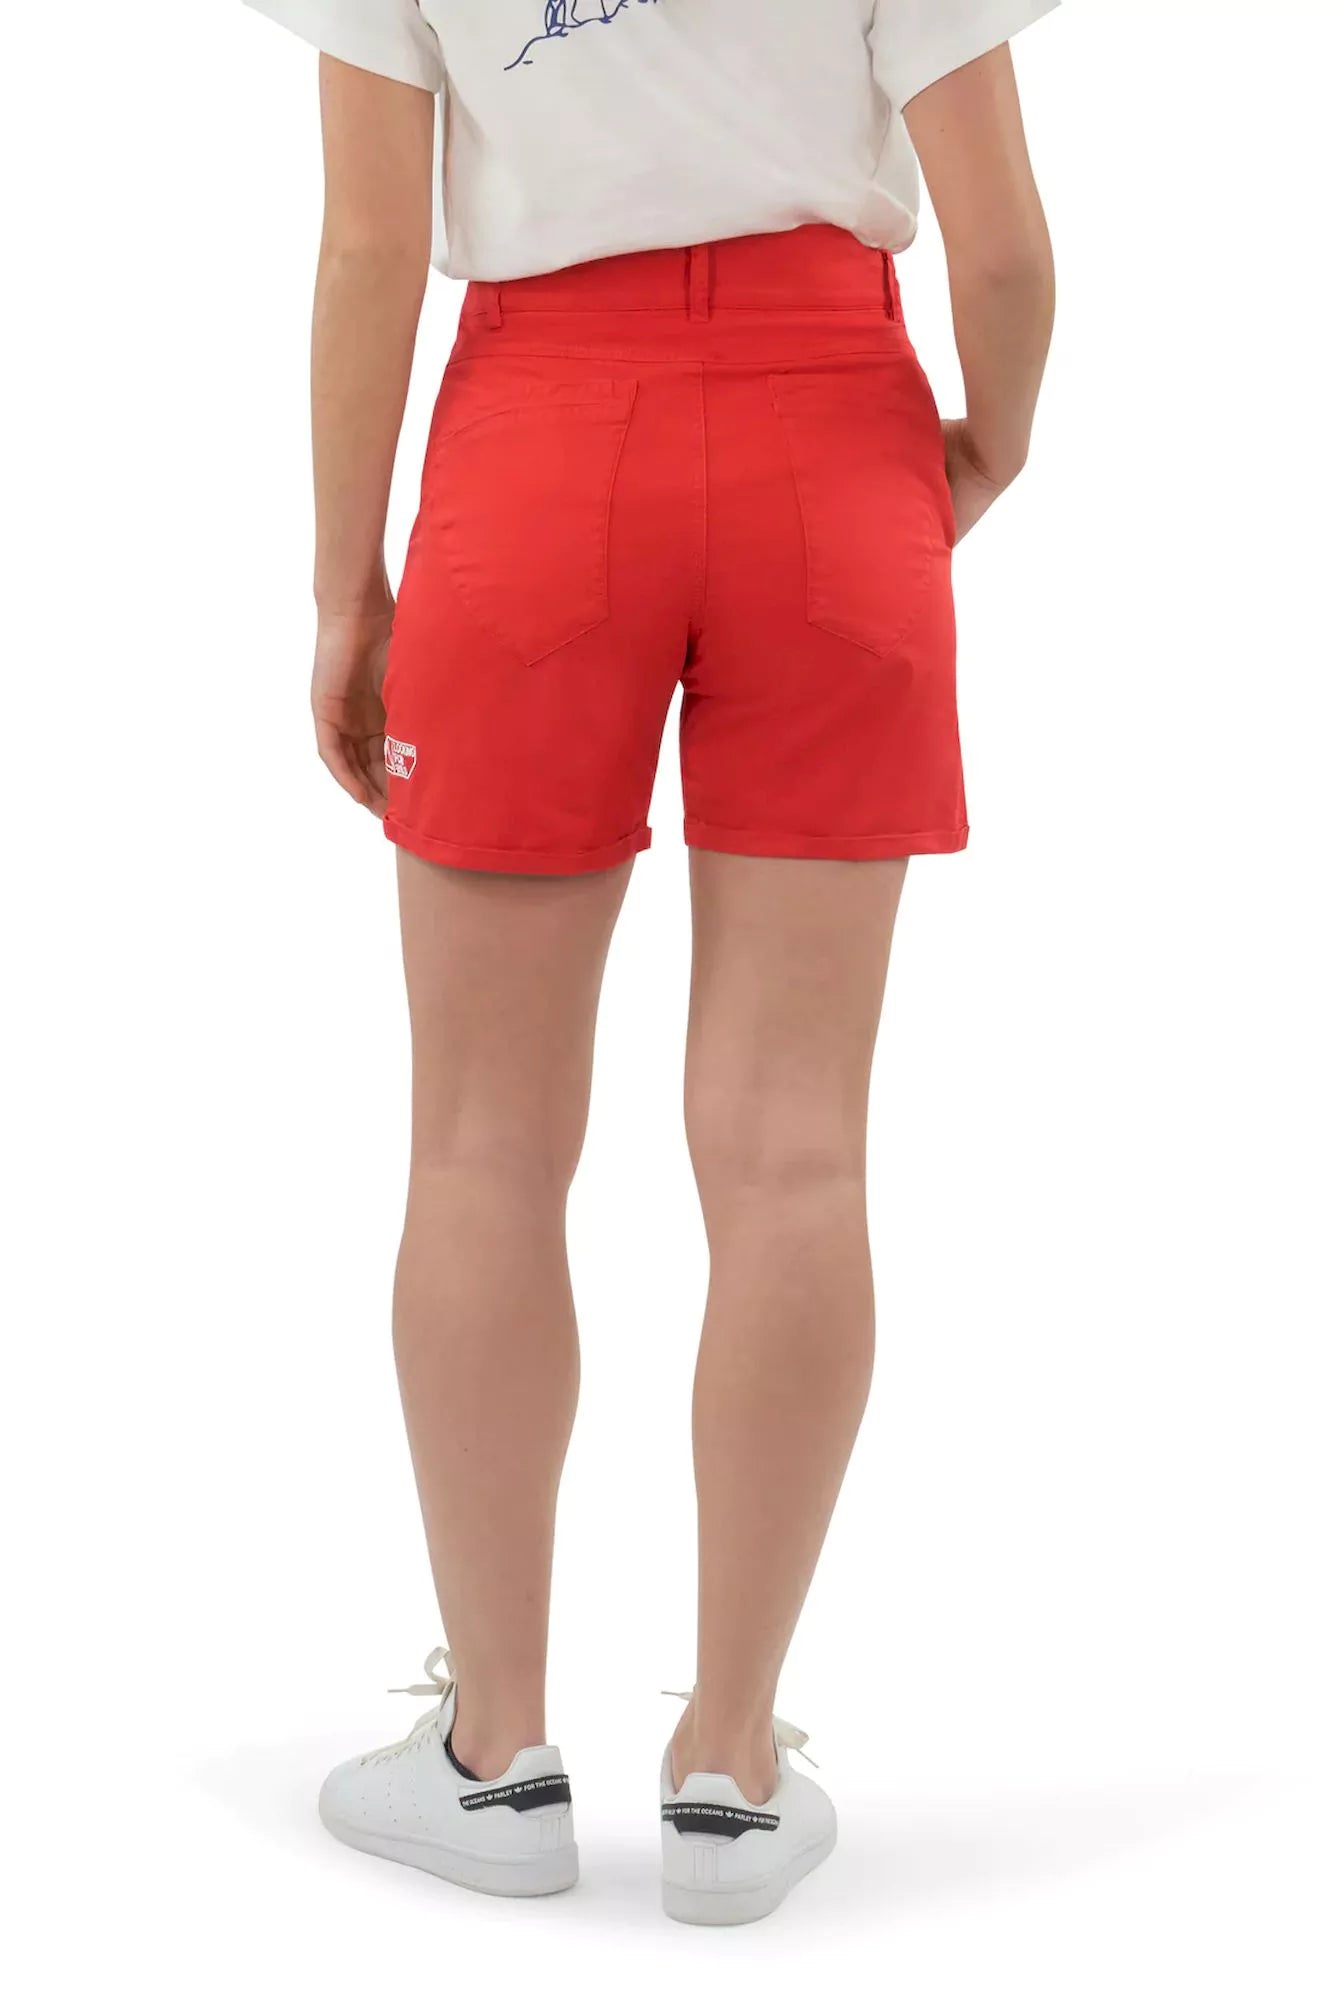 Looking For Wild - Women's Bavella Short - Rosso